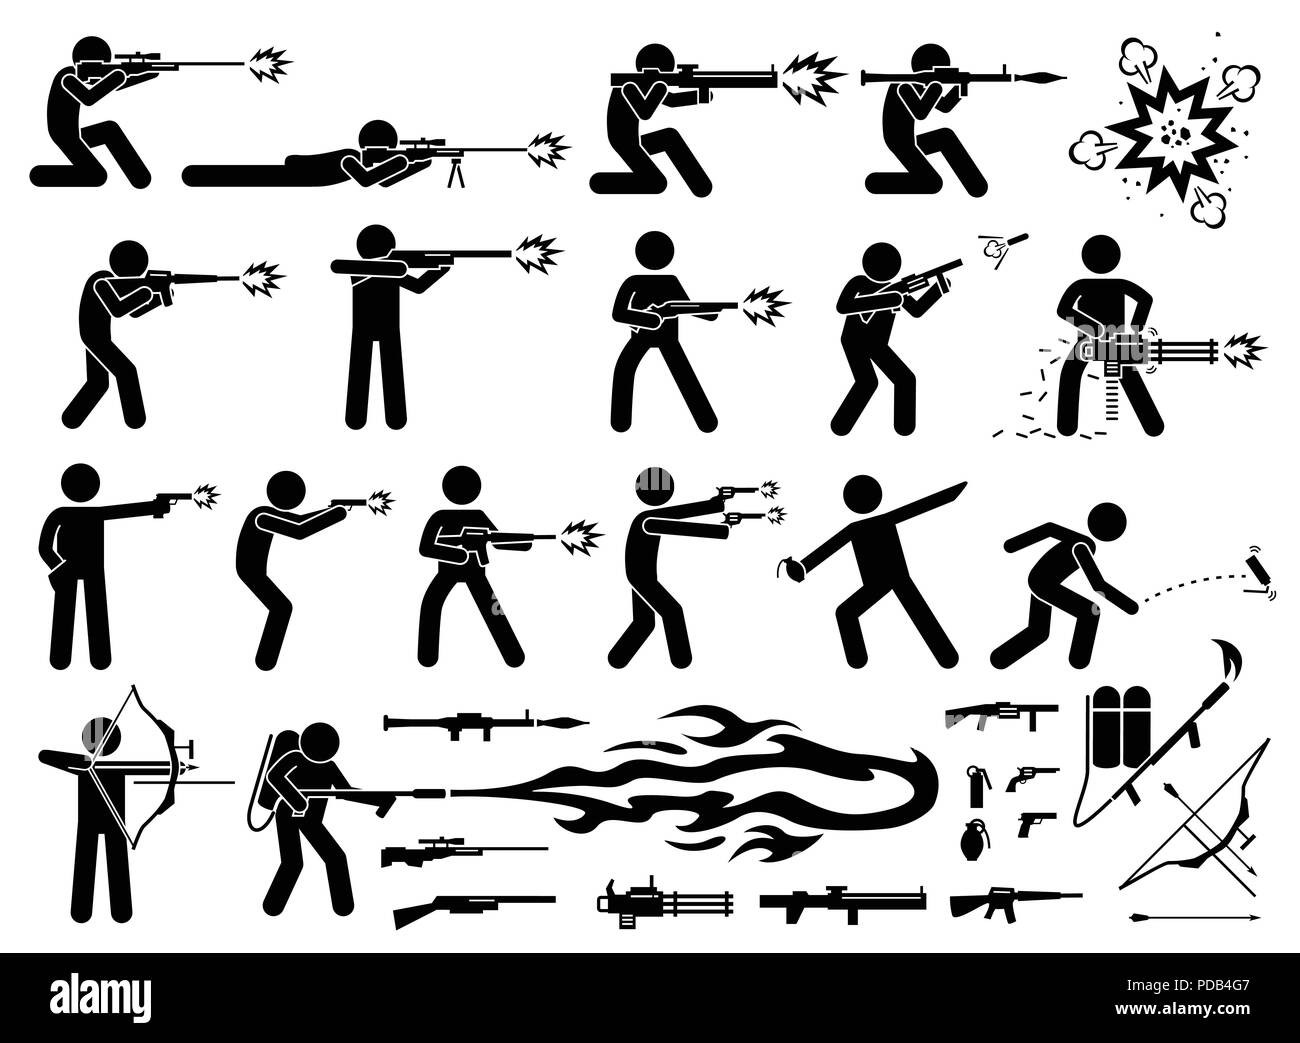 Man attacks with various type of modern warfare weapons. Stock Vector